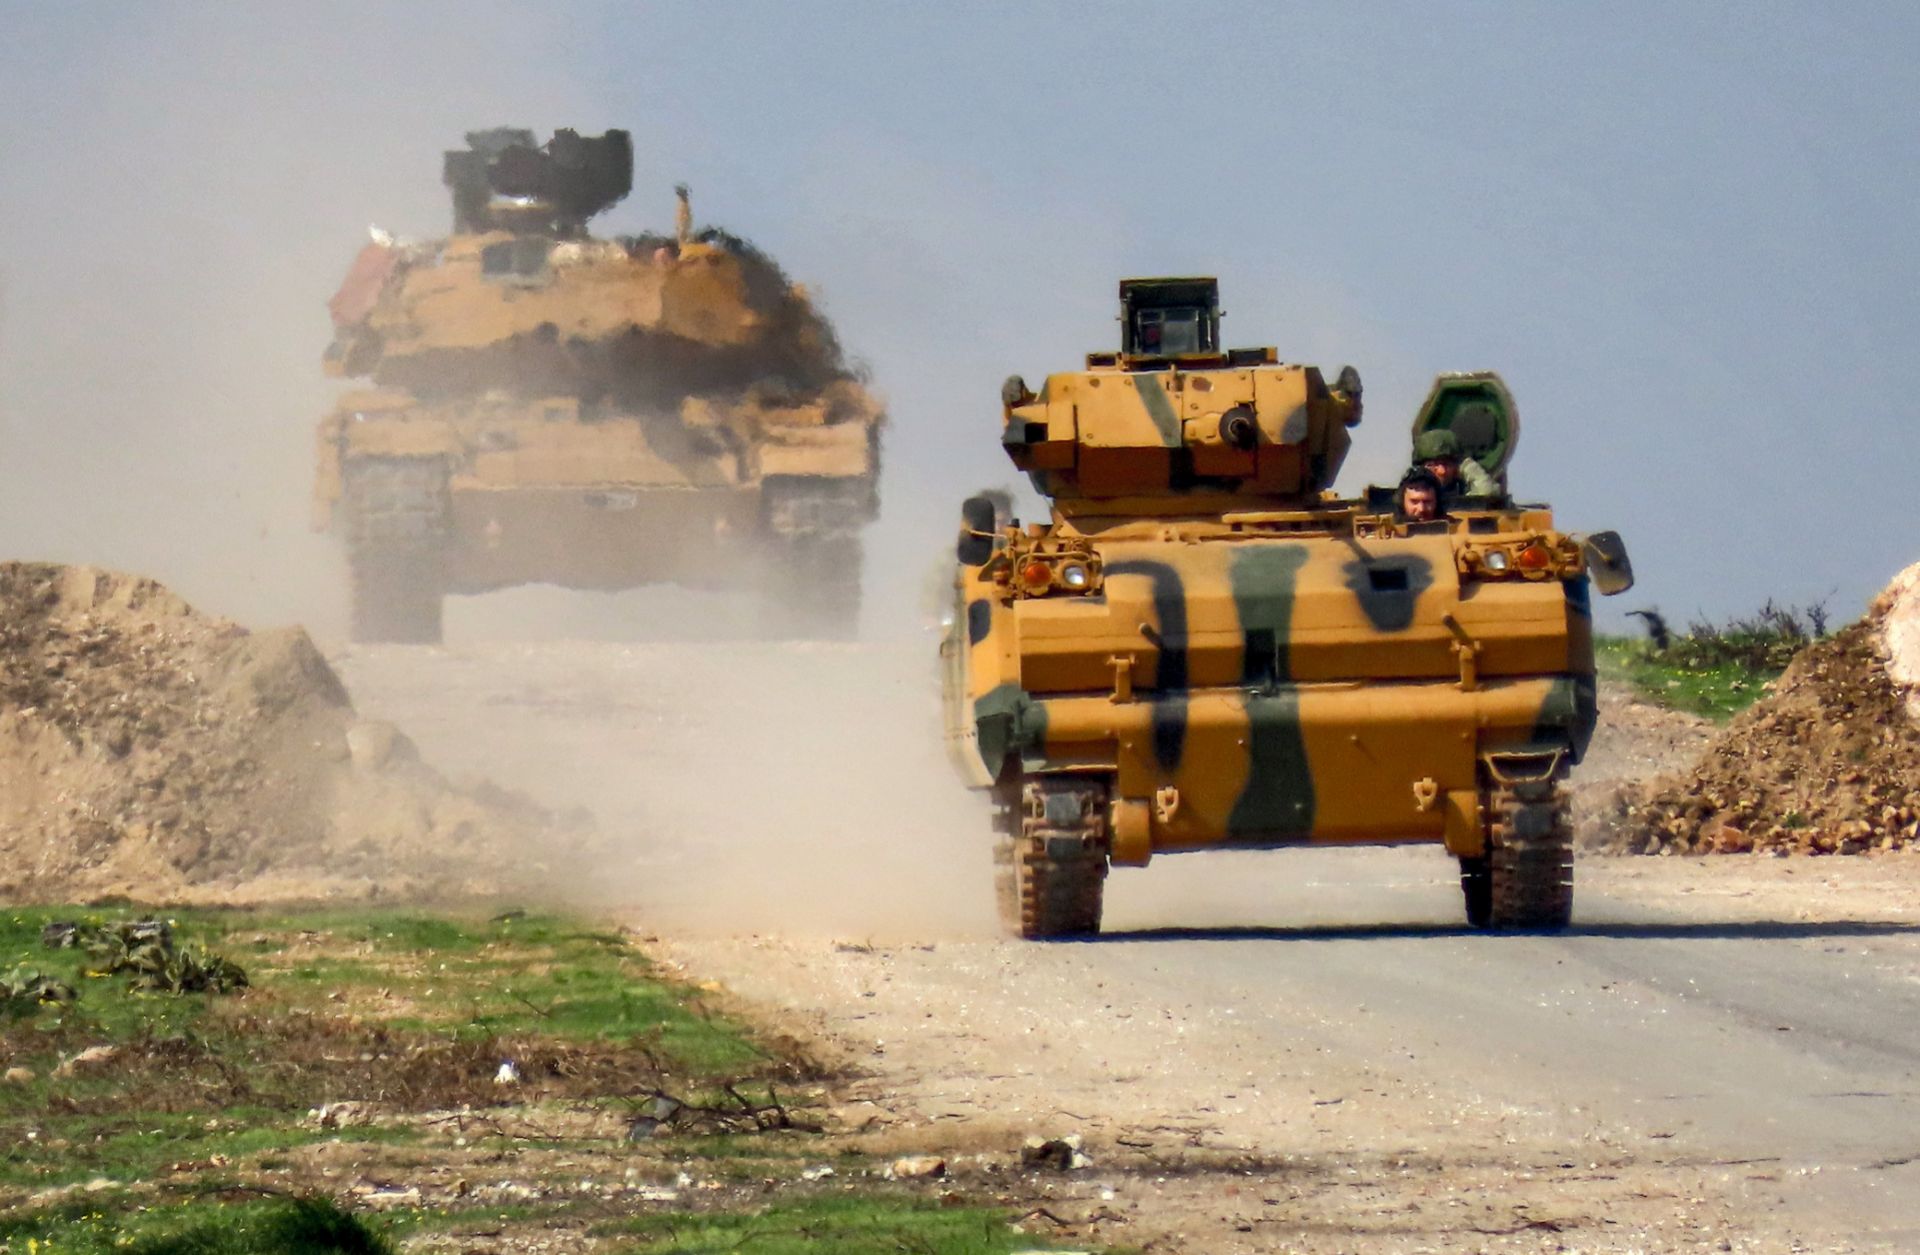 A Turkish military infantry fighting vehicle (IFV), followed by a battle tank, is seen along the M4 highway in northern Syria on March 15, 2020.